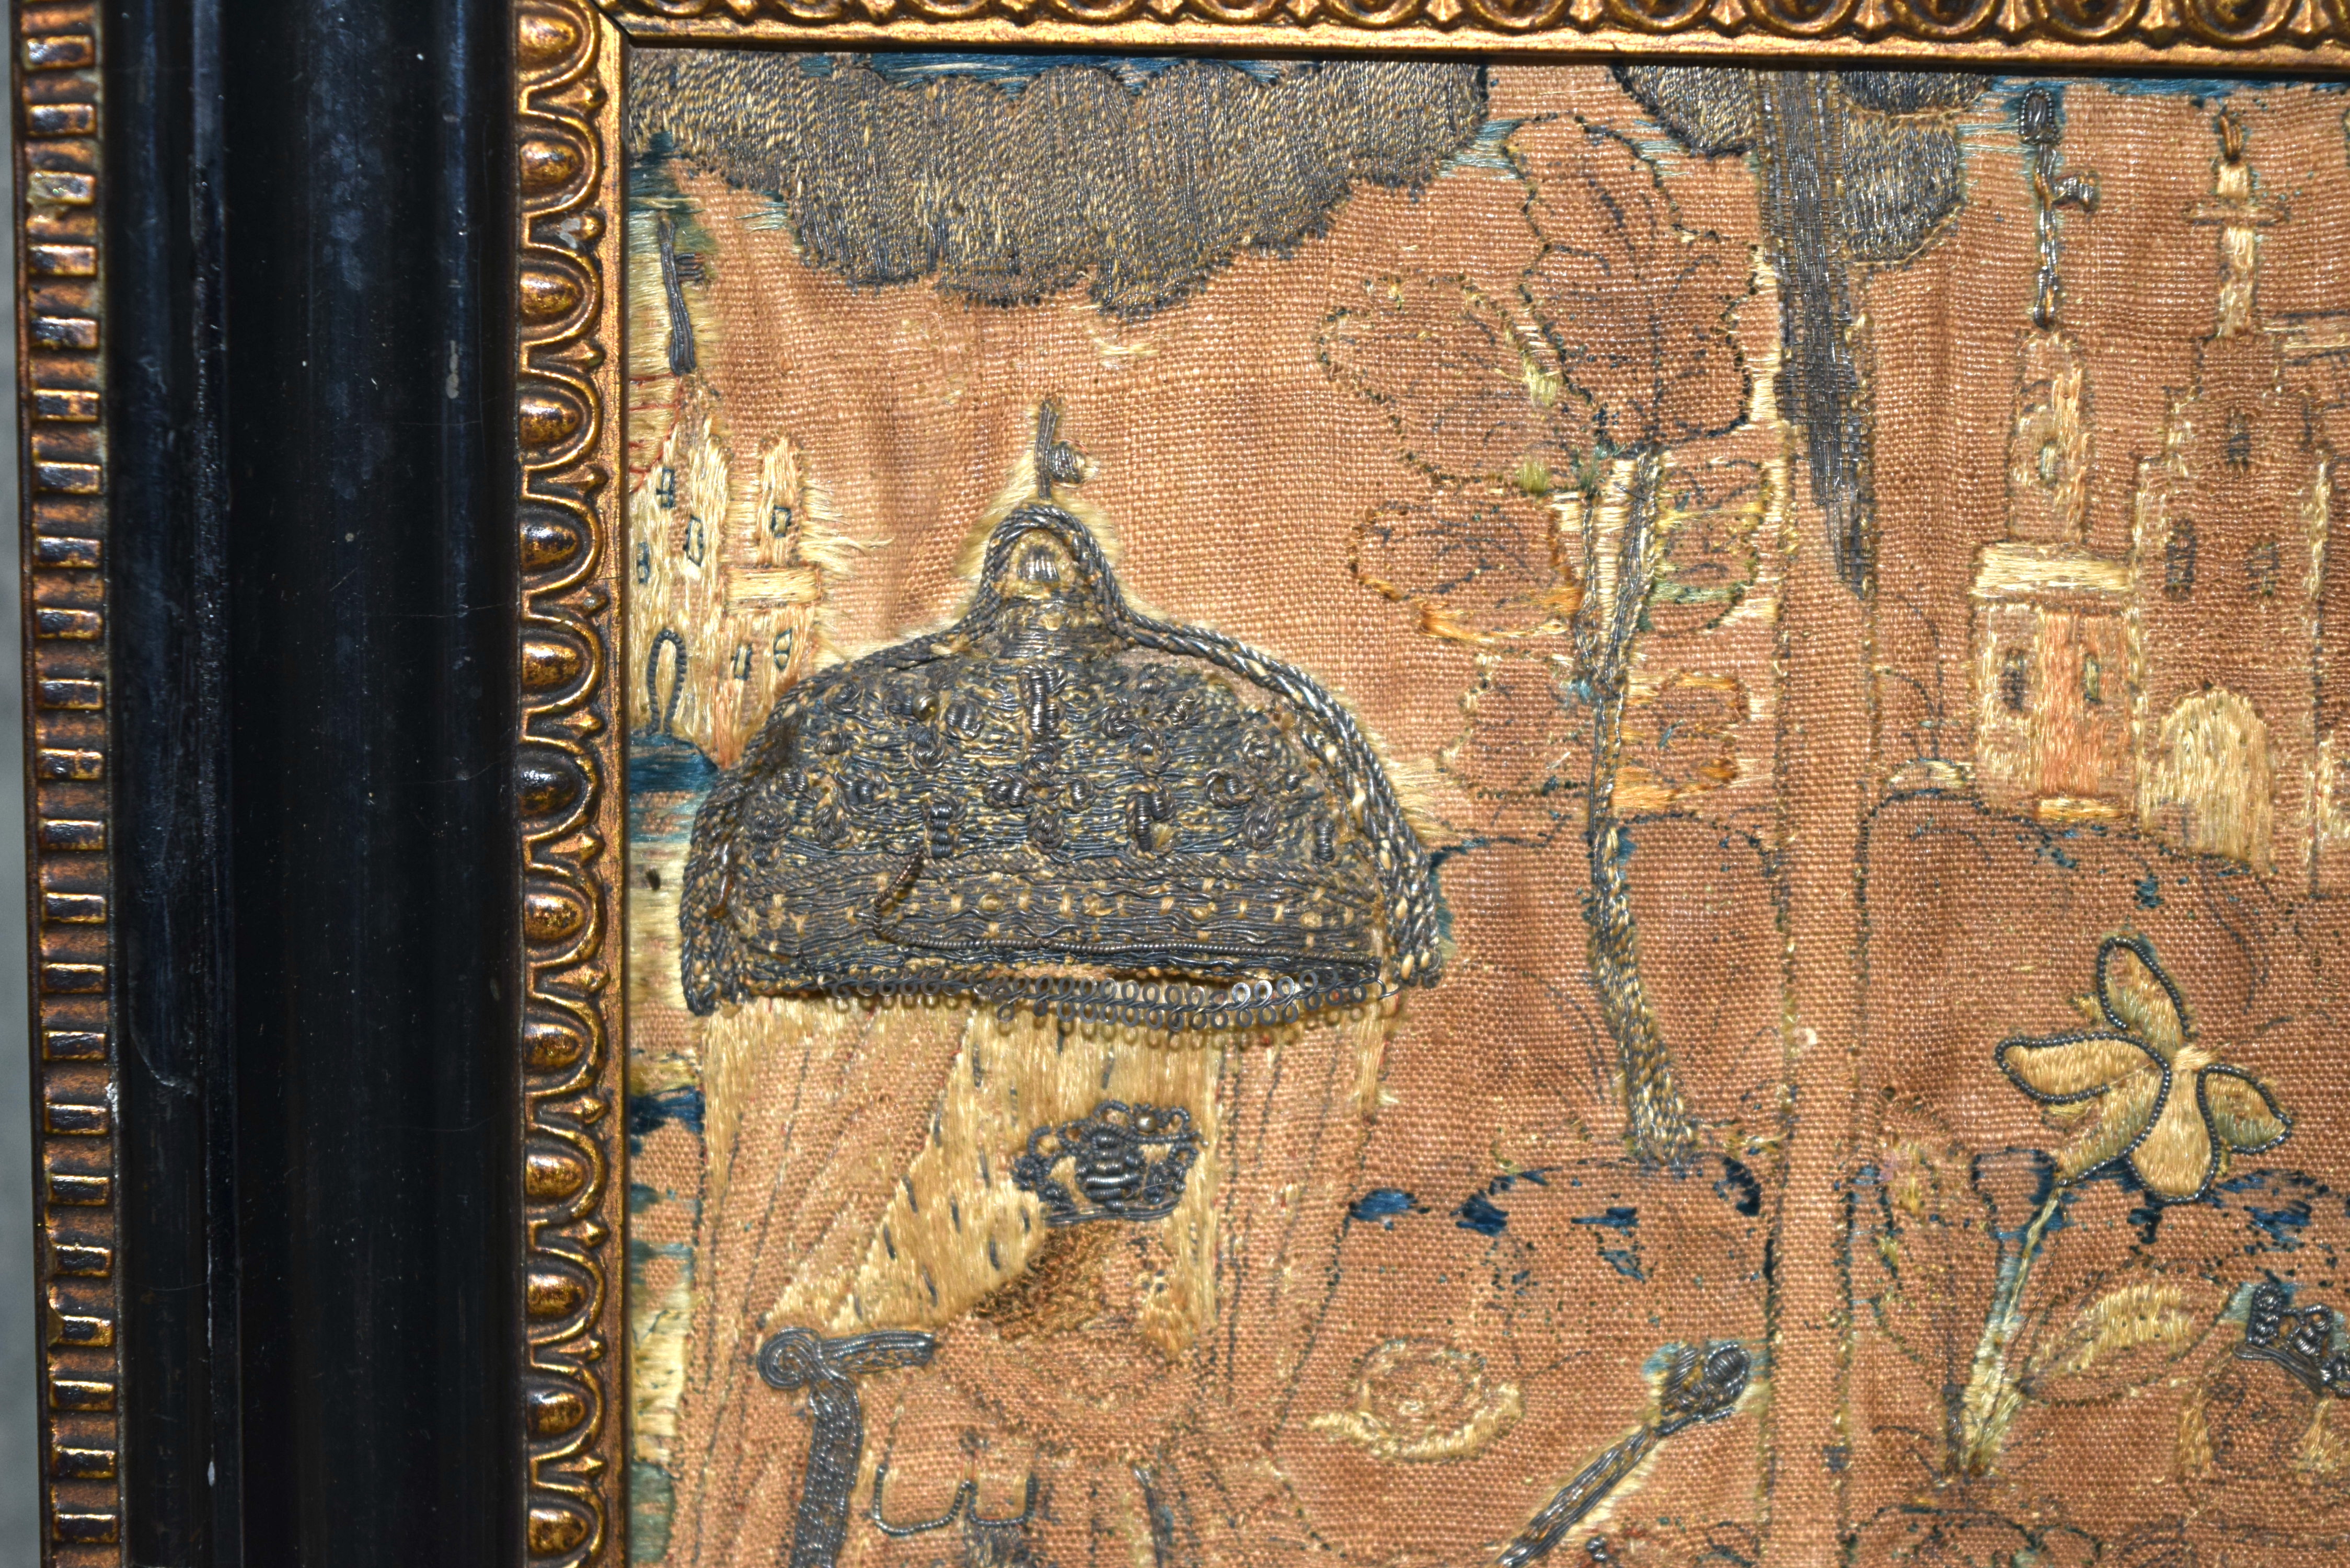 A VERY RARE 17TH CENTURY ENGLISH EMBROIDERED STUMP WORK PANEL depicting a very unusual scene of a Ki - Image 9 of 12